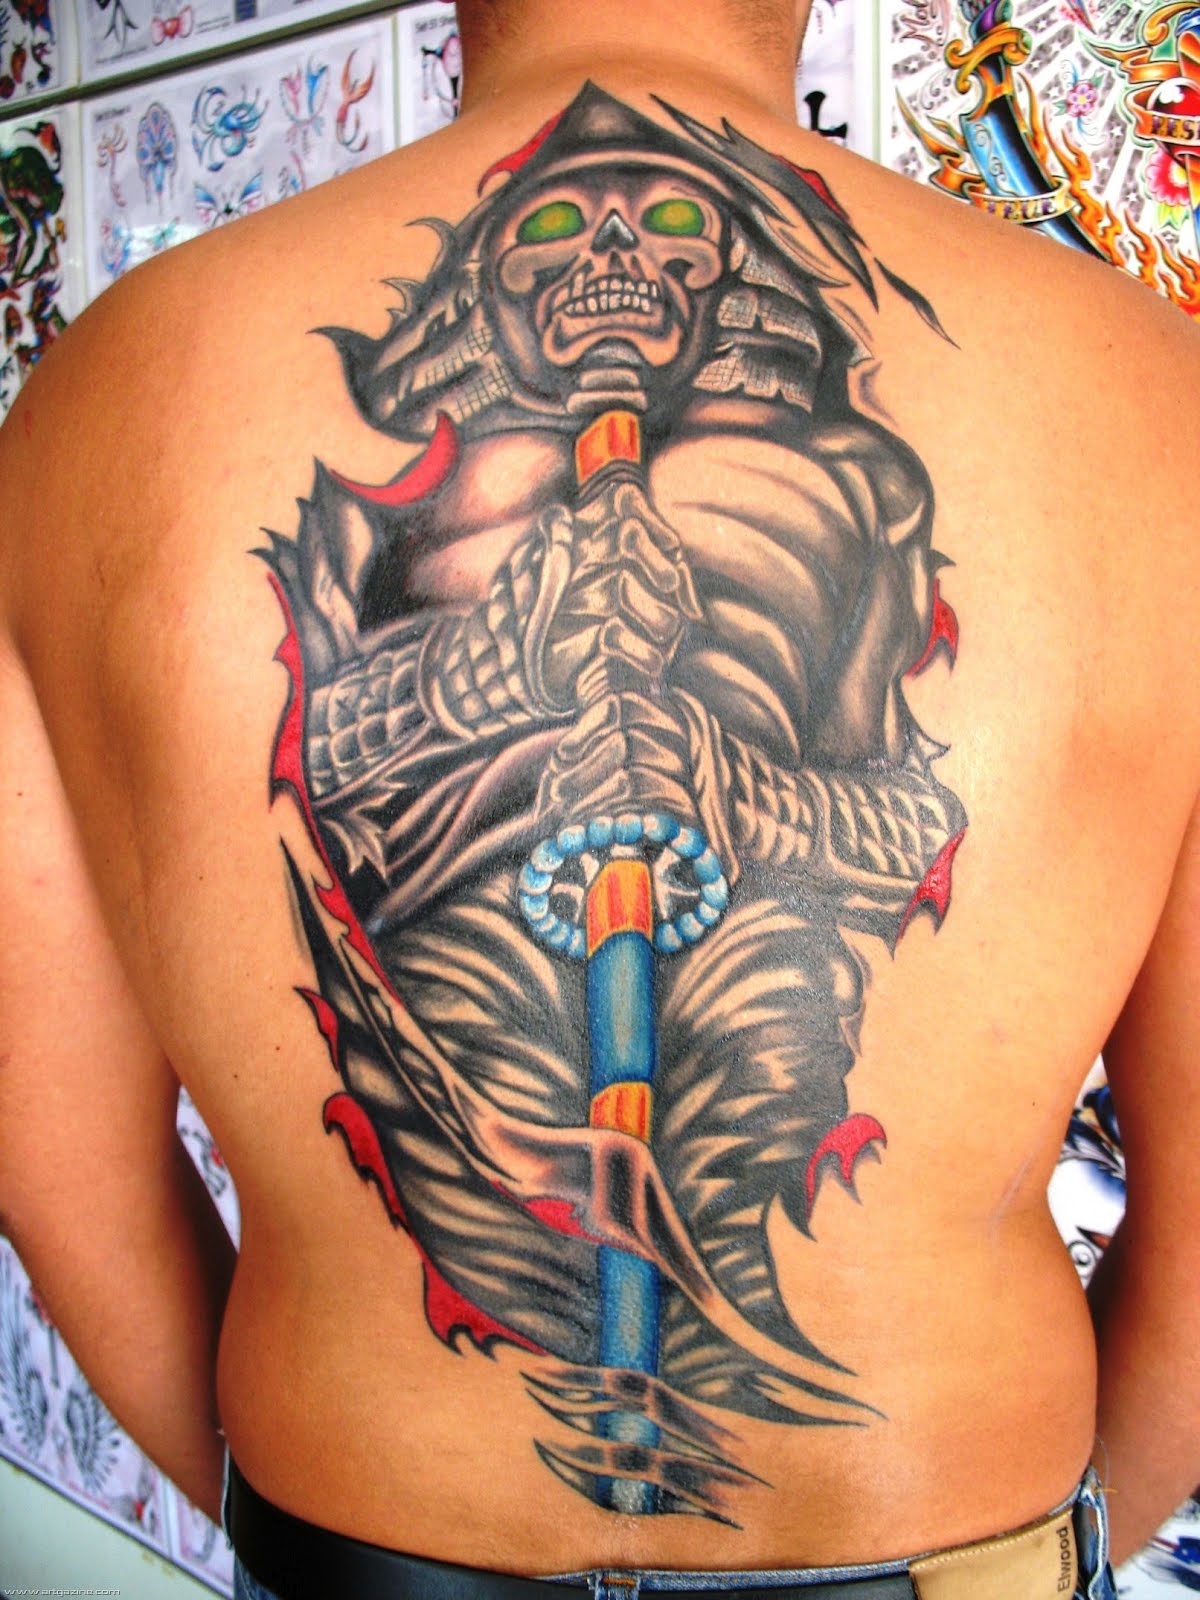 Japanese Tattoo Designs For Men And Women - The Xerxes Perfect Japanese Tattoos